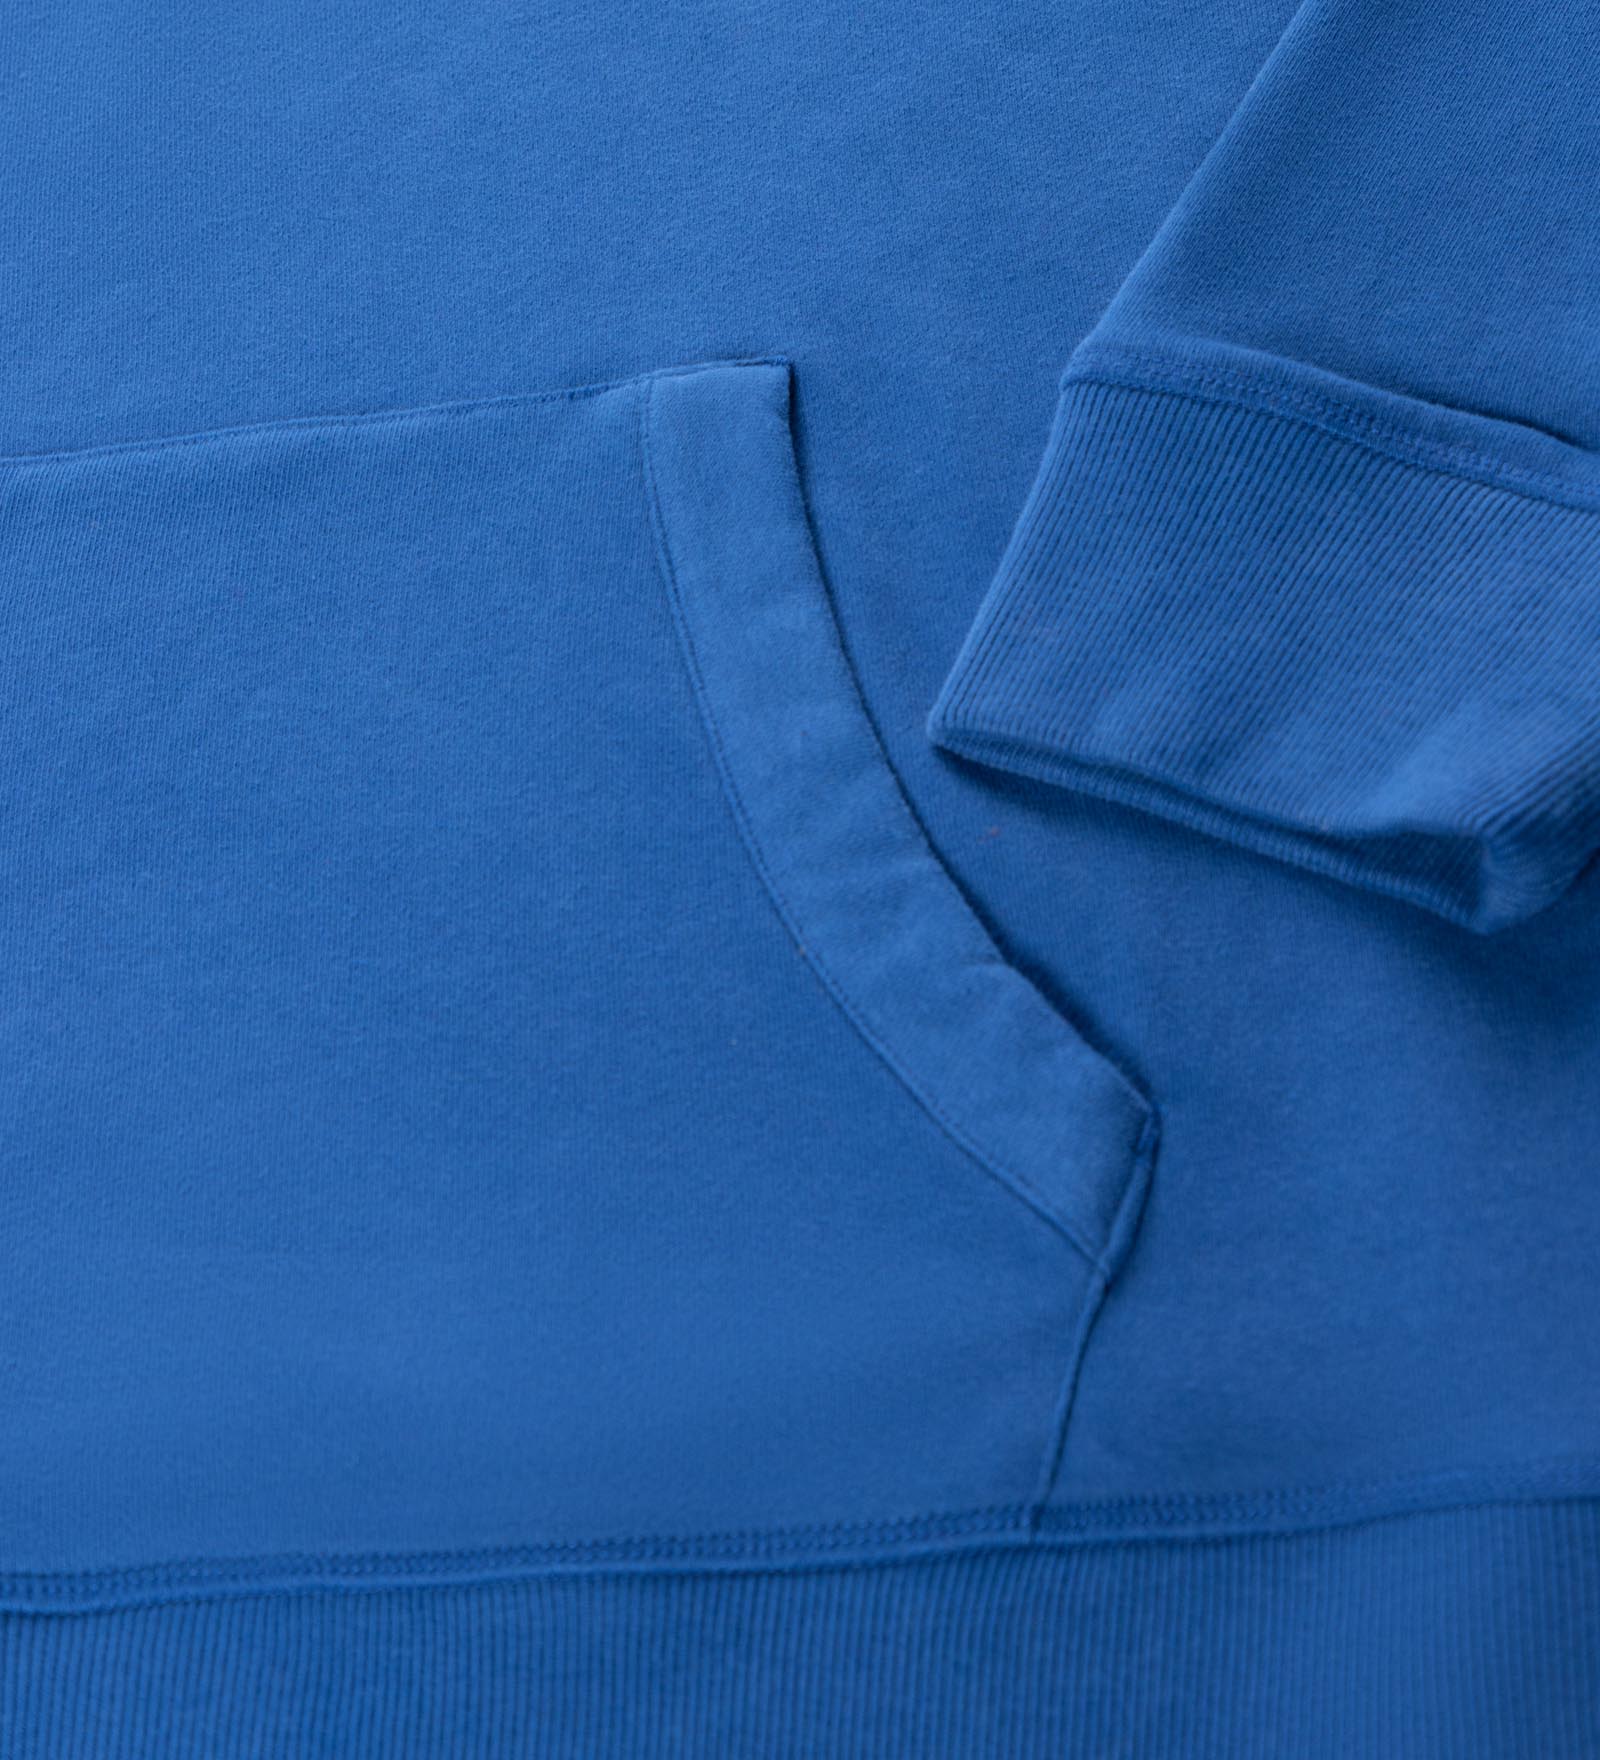 Hoodie Blue for Men and Women 